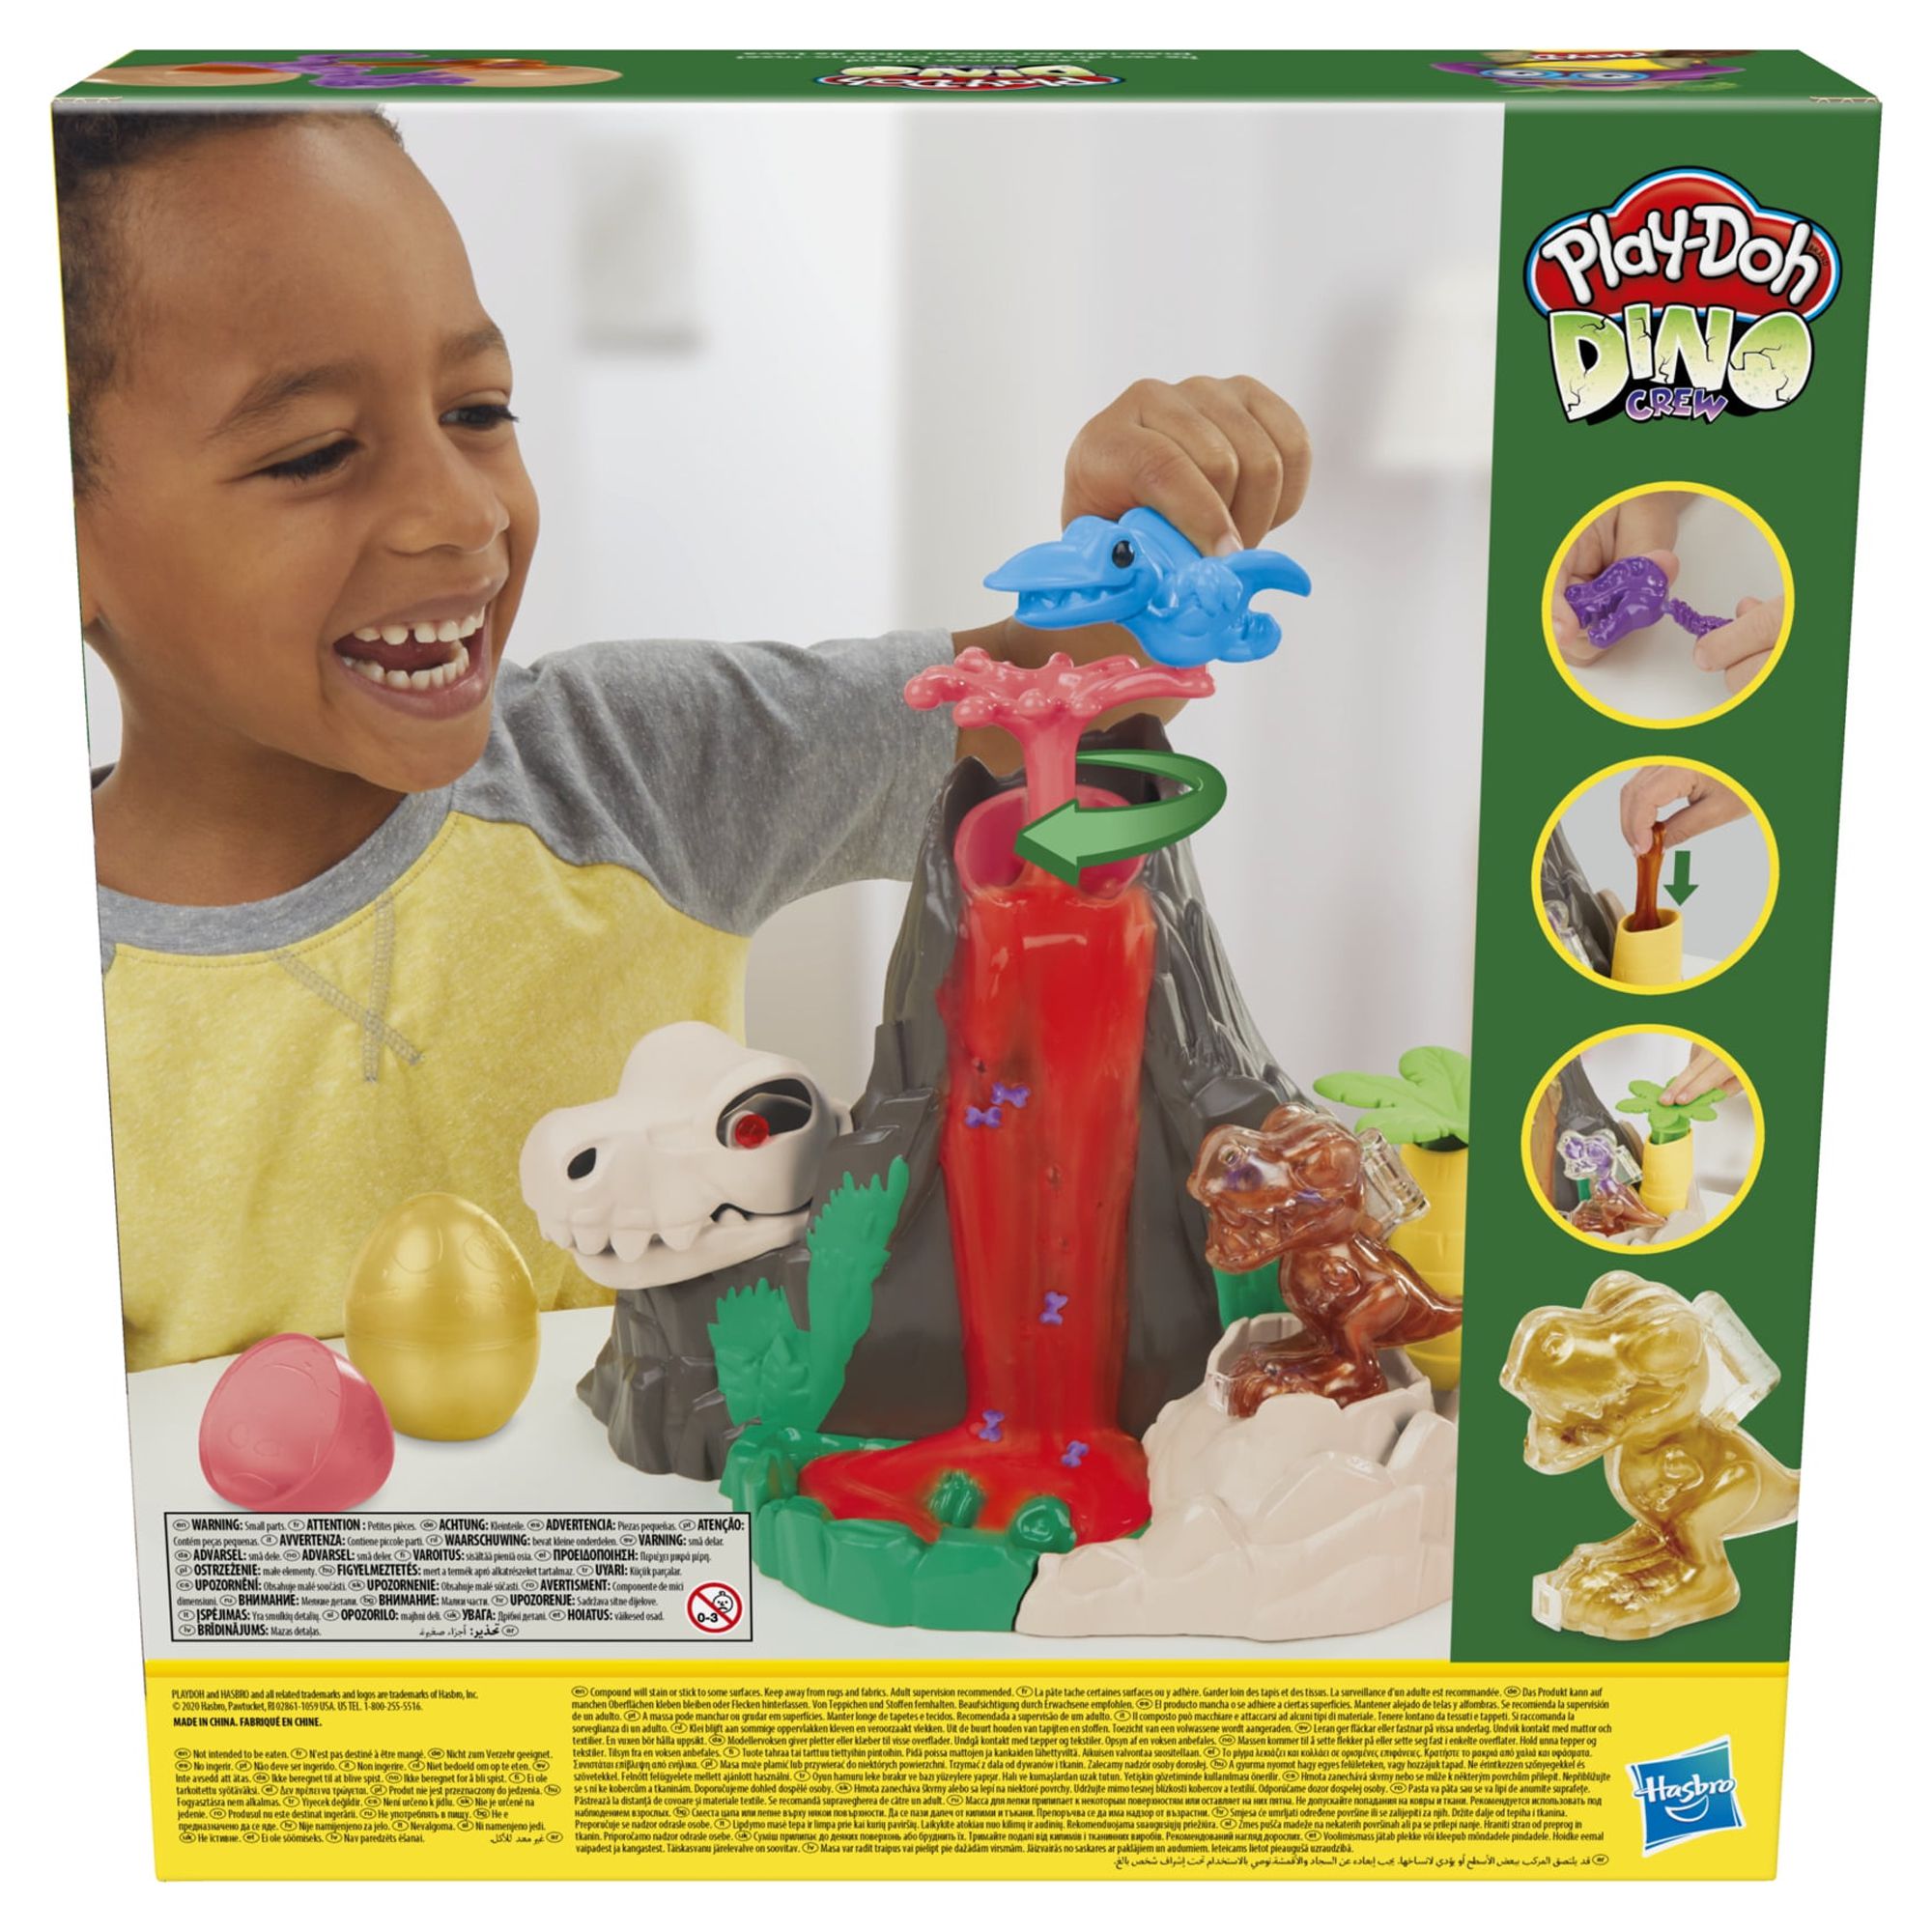 Play-Doh Slime Dino Crew Lava Bones Island Volcano Playset for Kids 4 Years and Up, Non-Toxic - image 5 of 14